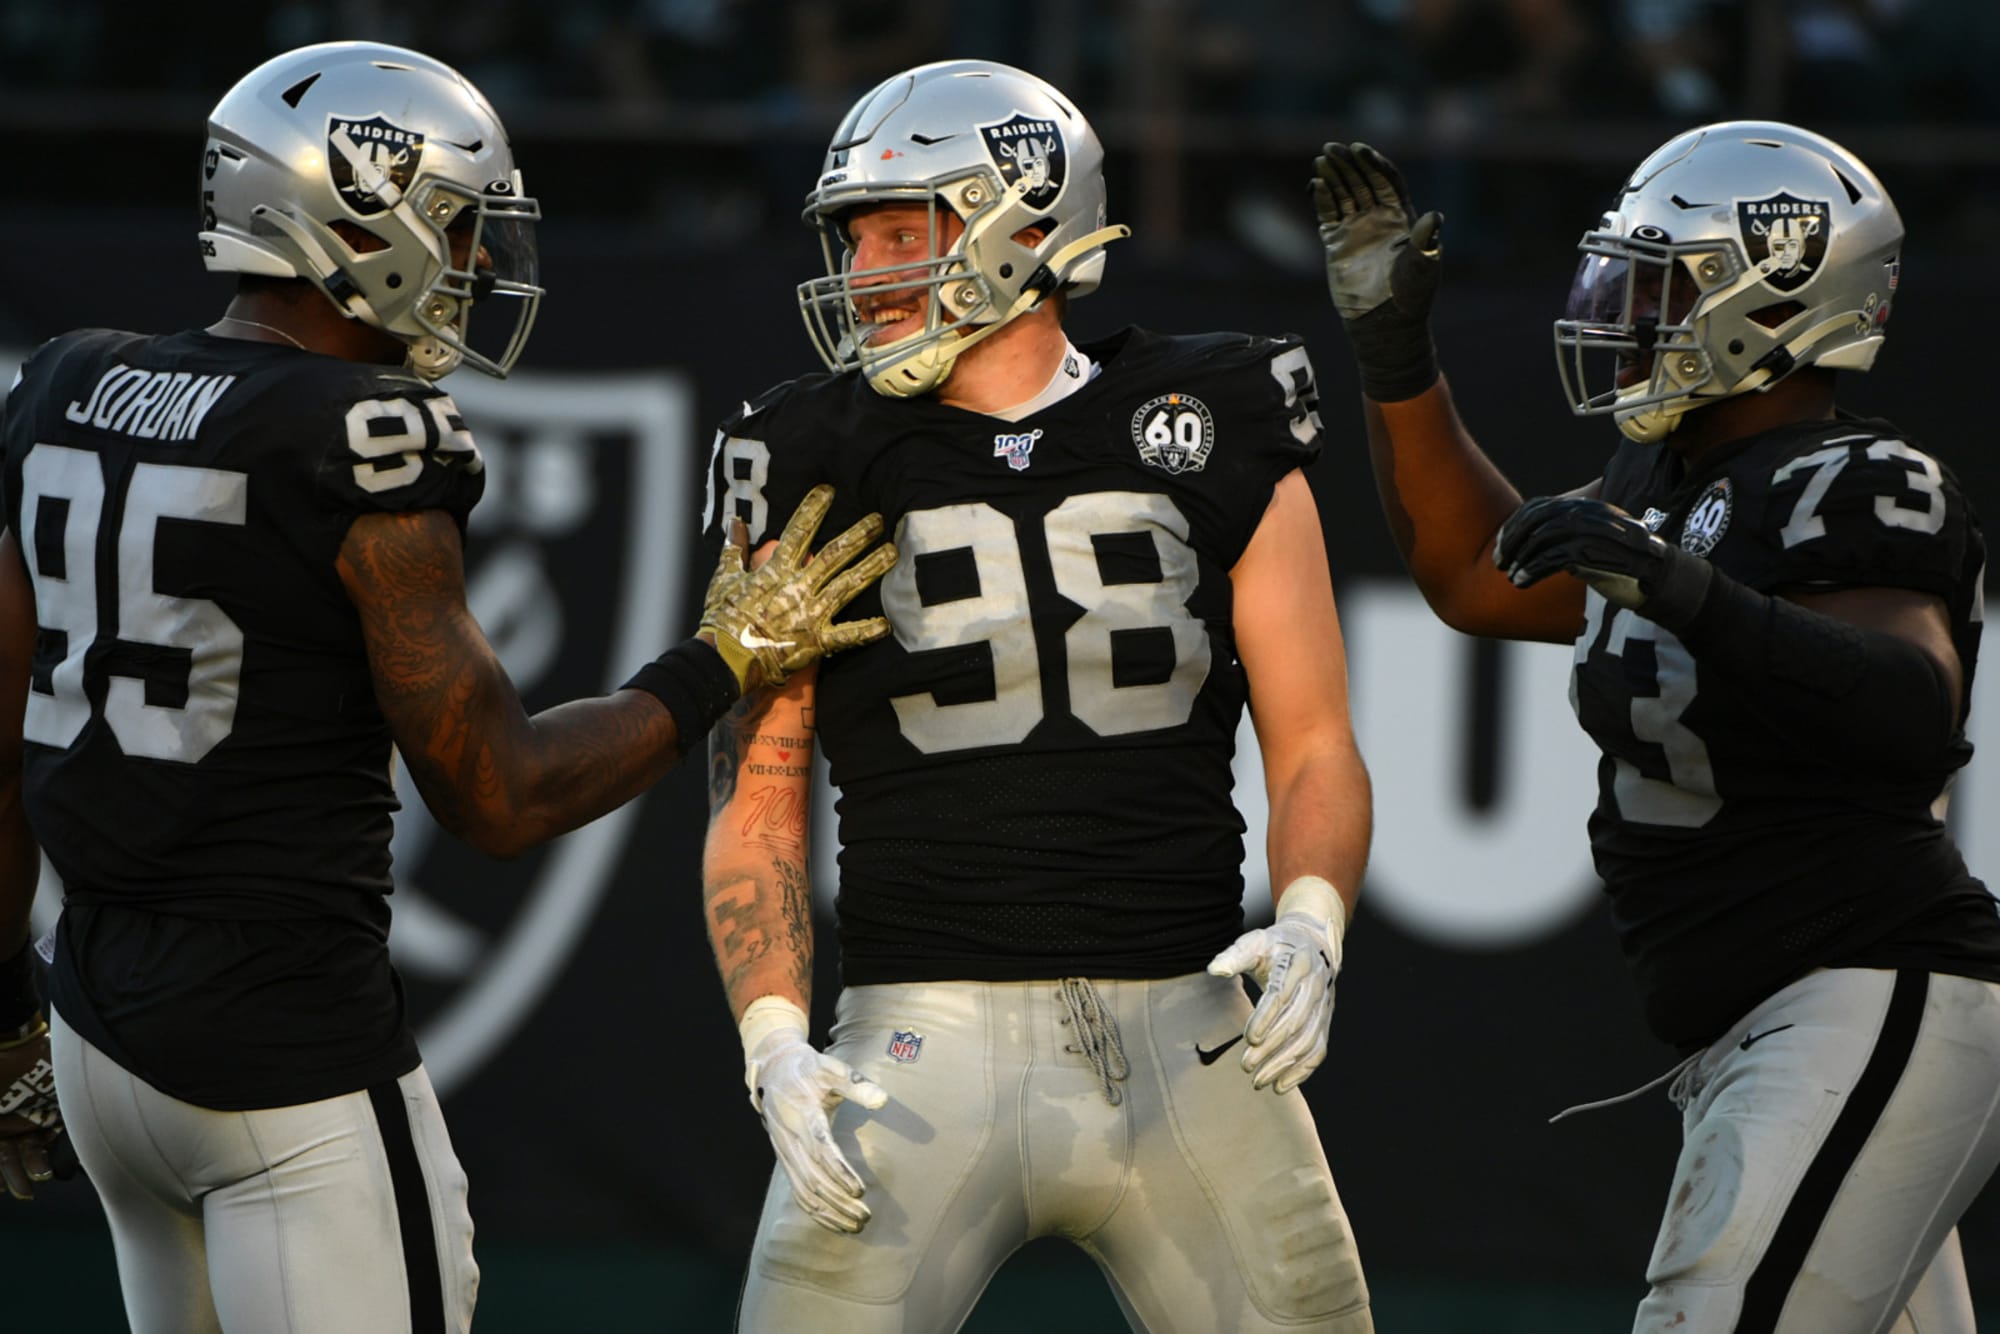 Raiders: Maxx Crosby's career day shows signs of future stardom